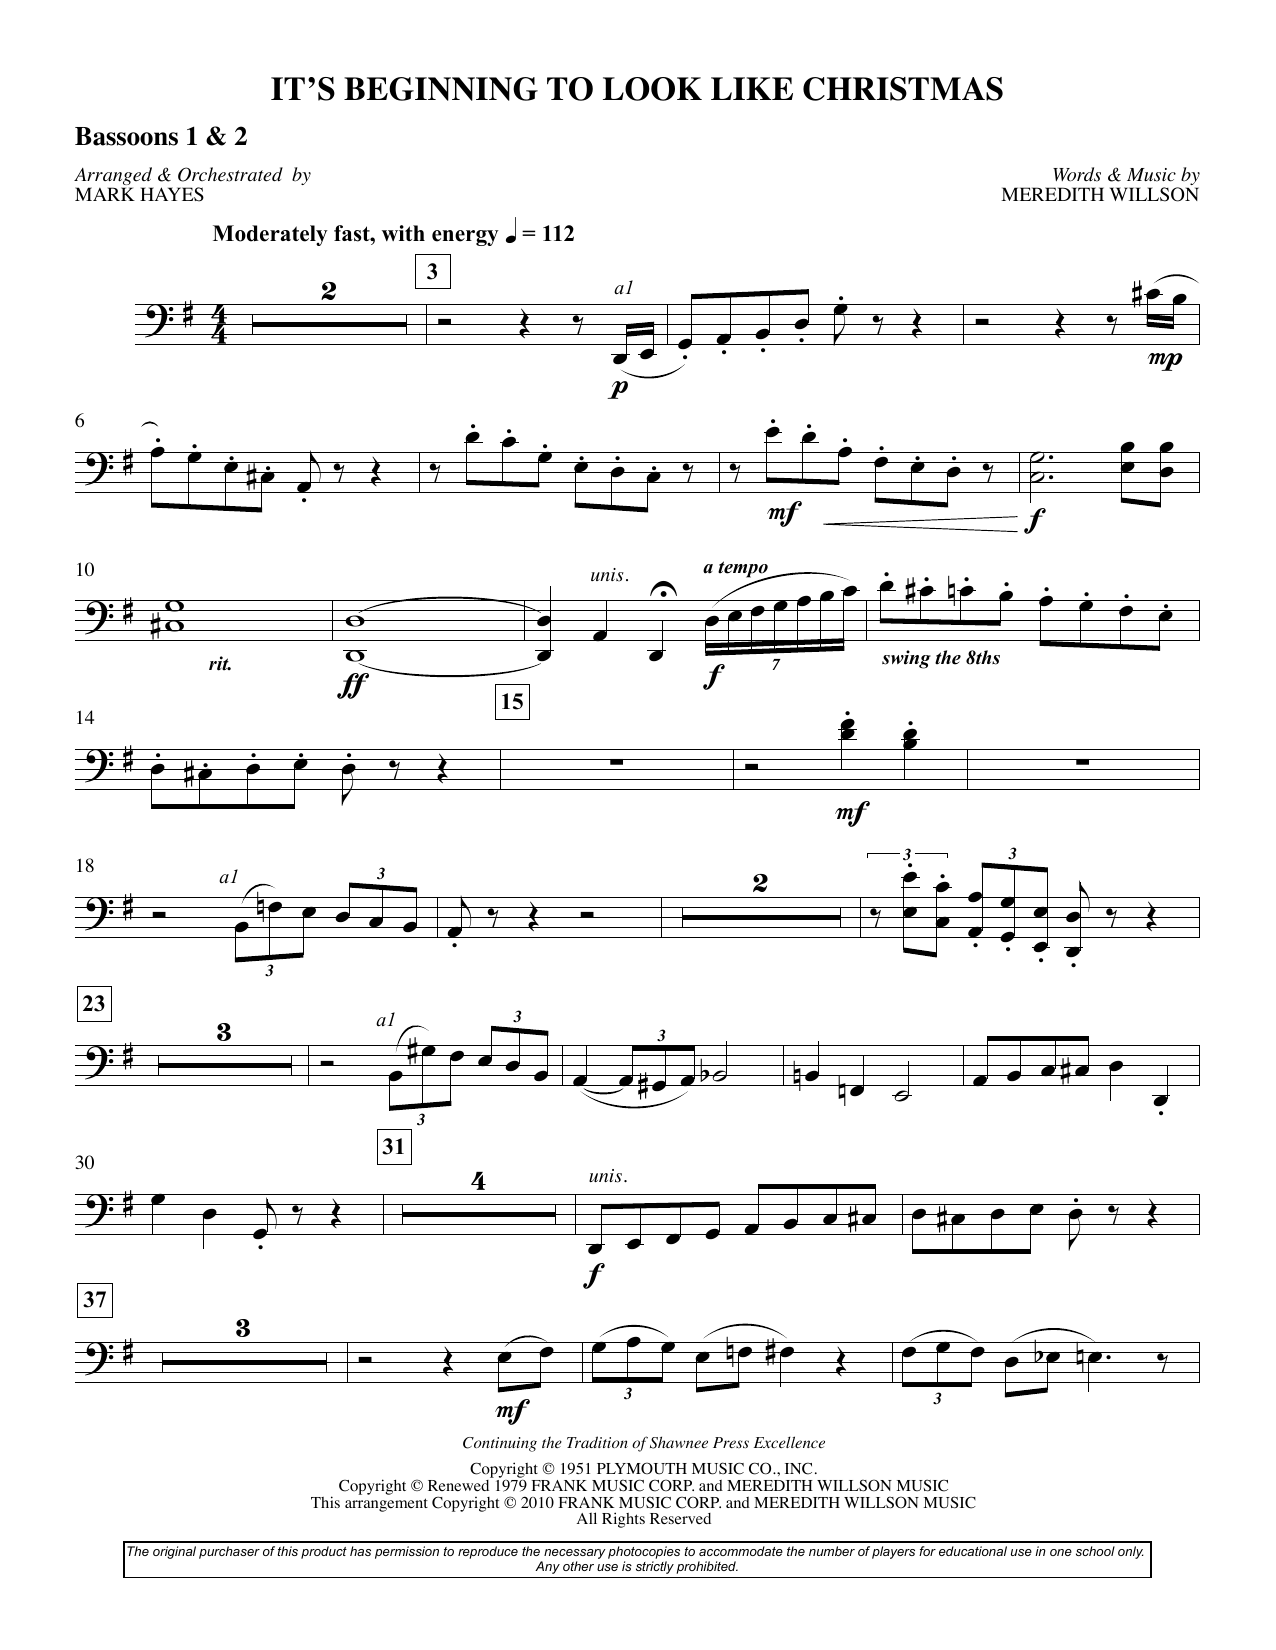 Meredith Willson It's Beginning To Look Like Christmas (arr. Mark Hayes) - Bassoon 1,2 sheet music preview music notes and score for Choir Instrumental Pak including 2 page(s)